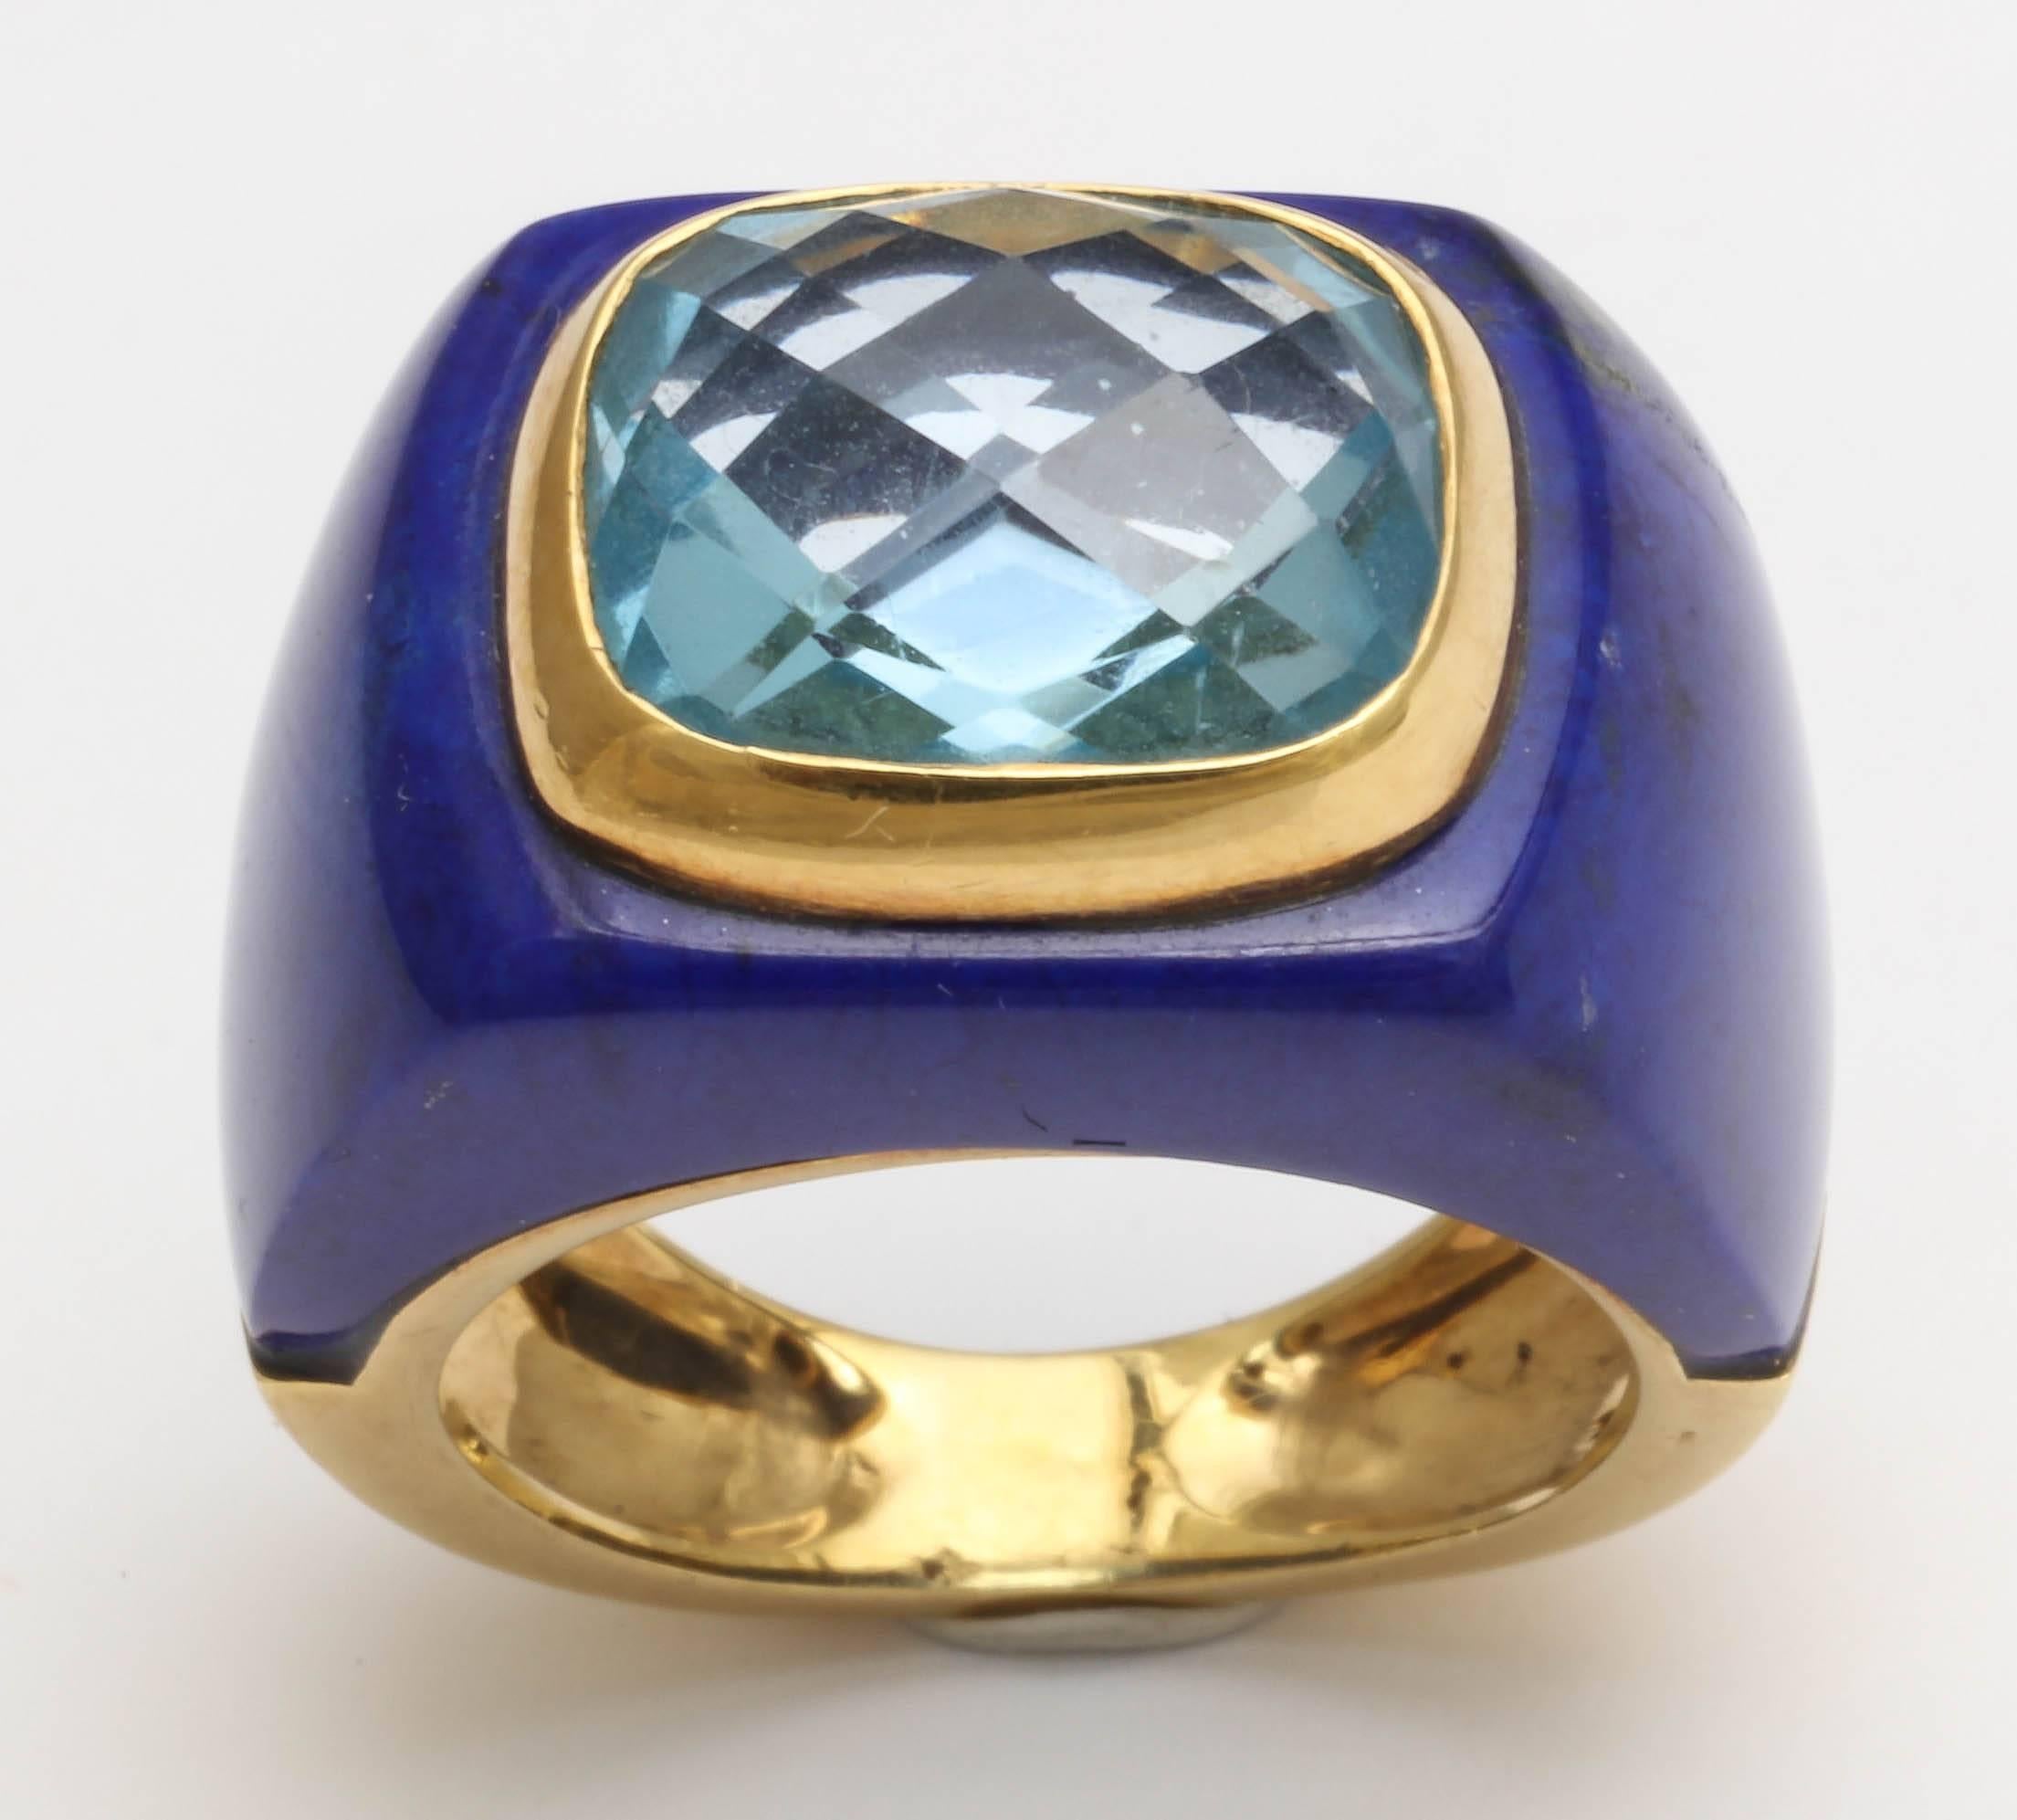 The center stone is a baby blue checkerboard cut 10 x 14 blue topaz.
It is bezel set and surrounded by custom cut top quality lapis lazuli. 
This ring is size 5.5 - 6 and cannot be sized.